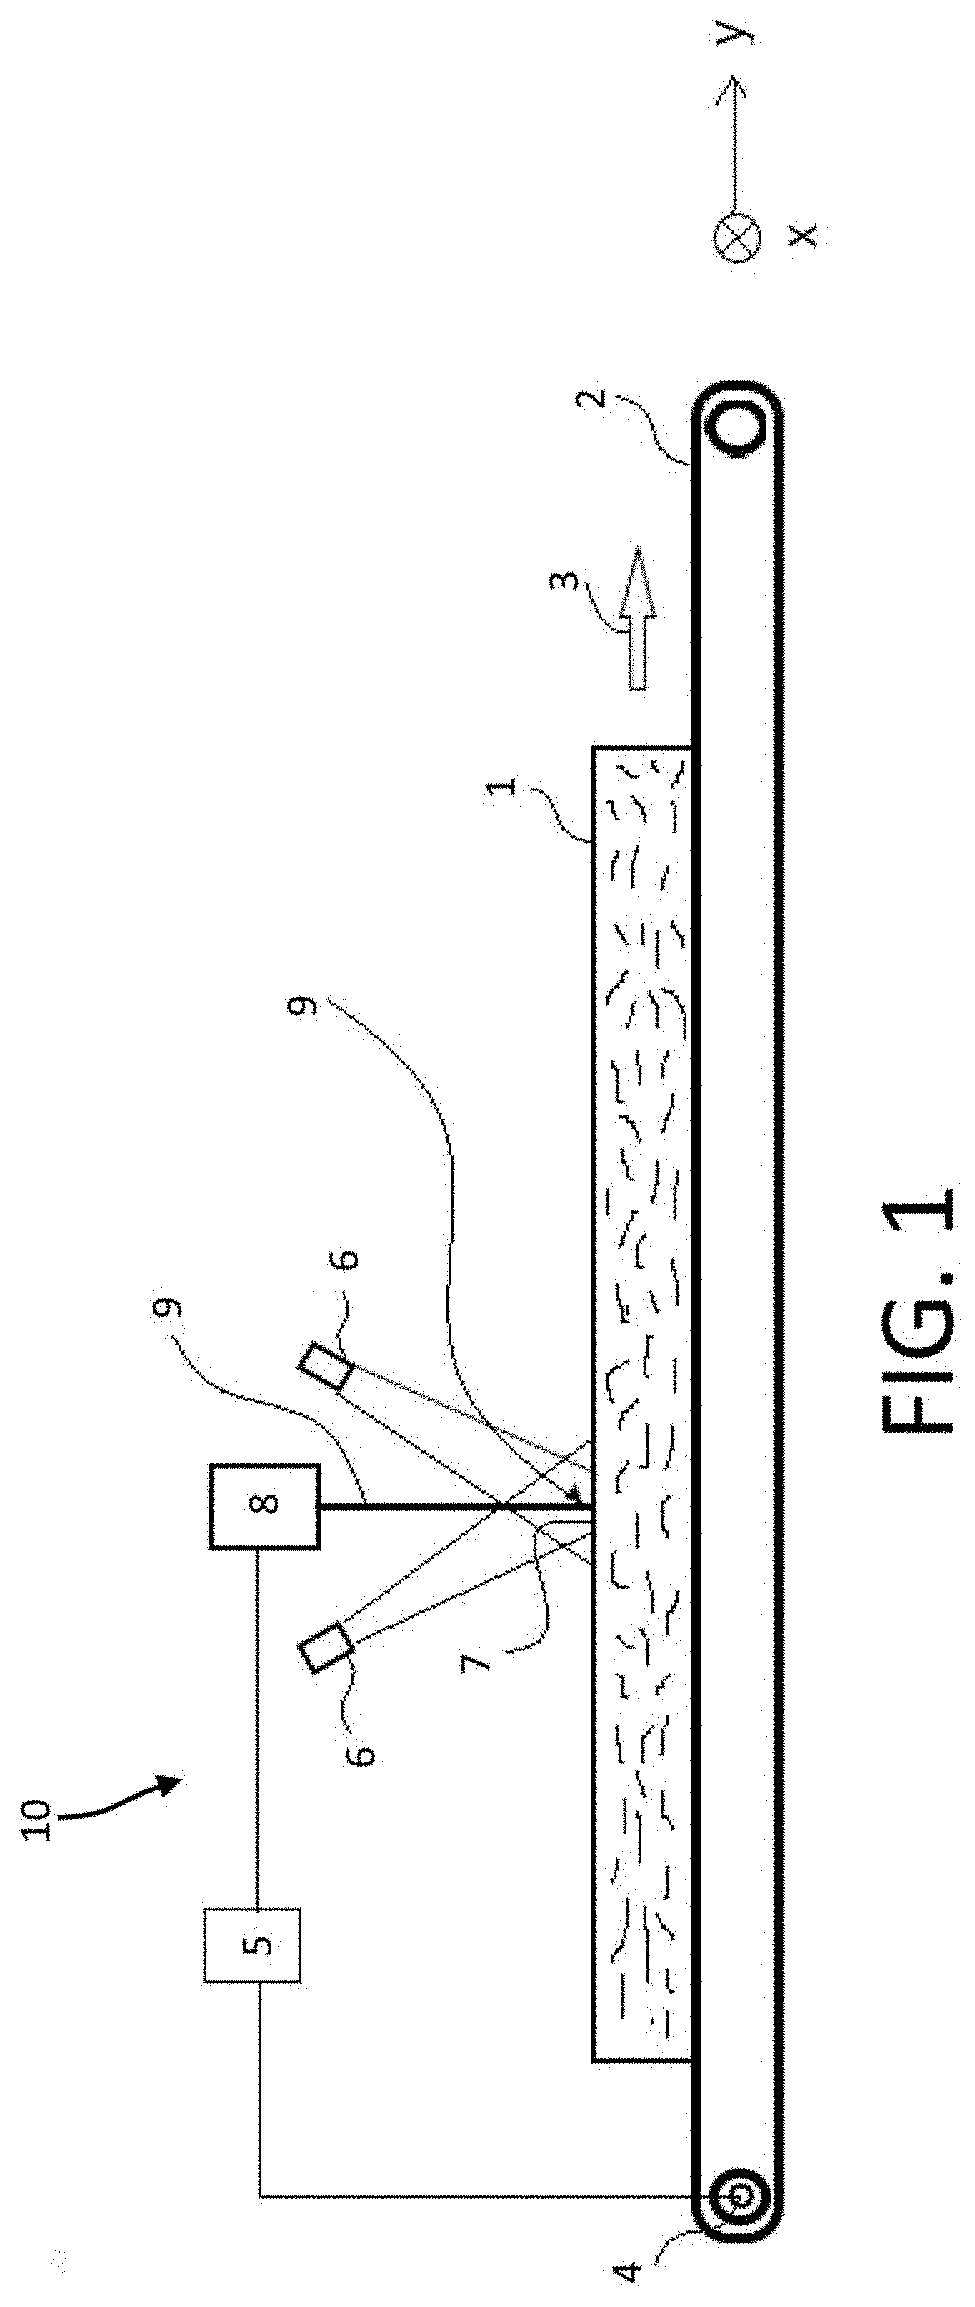 Method and system for characterizing undebarked wooden logs and computing optimal debarking parameters in real time